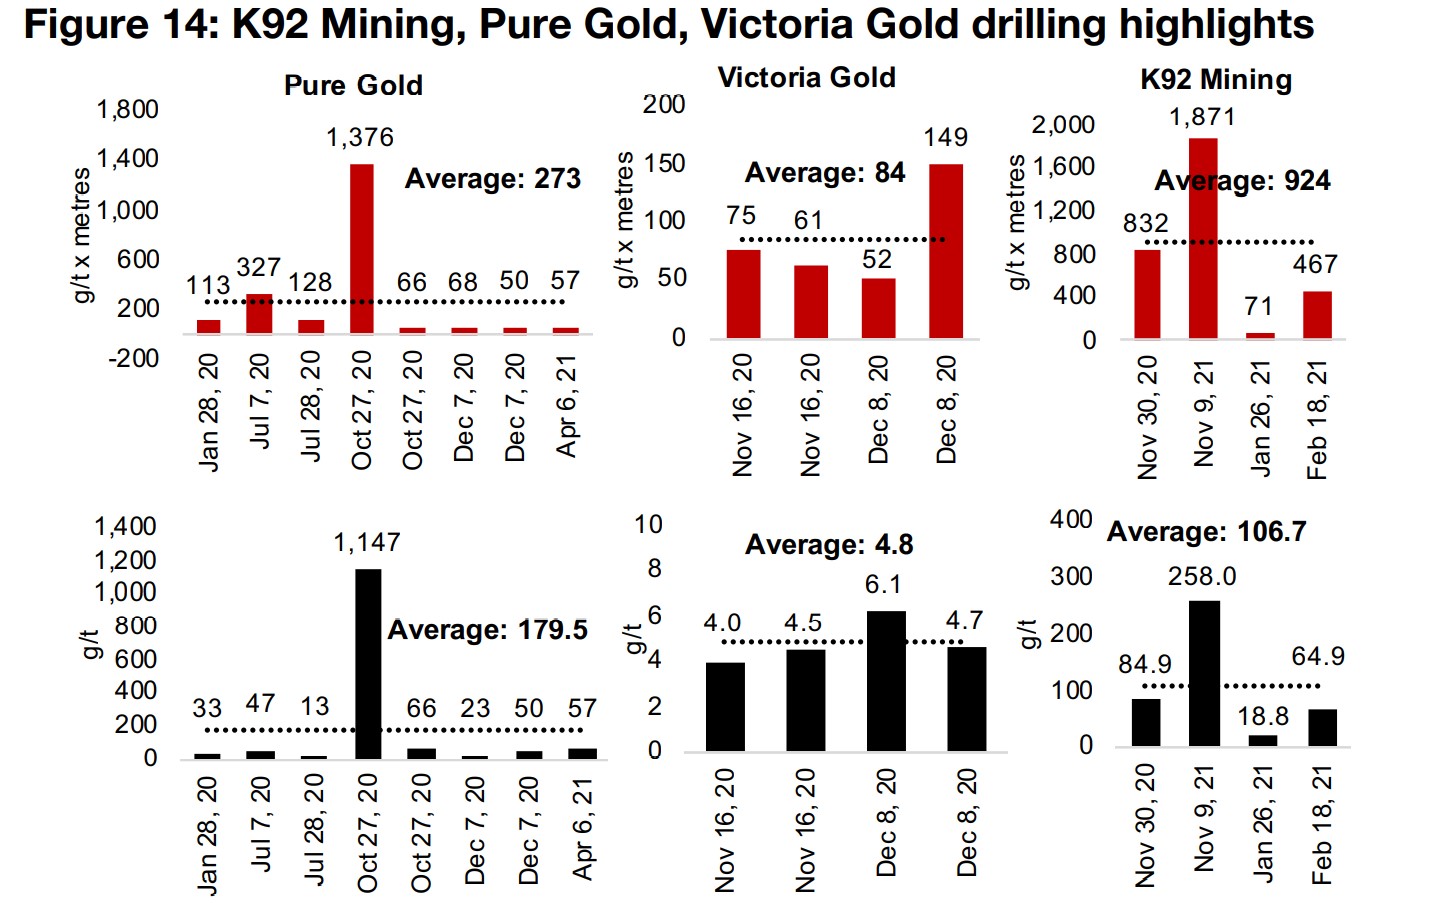 K92 Mining, Pure Gold and Victoria Gold drilling results